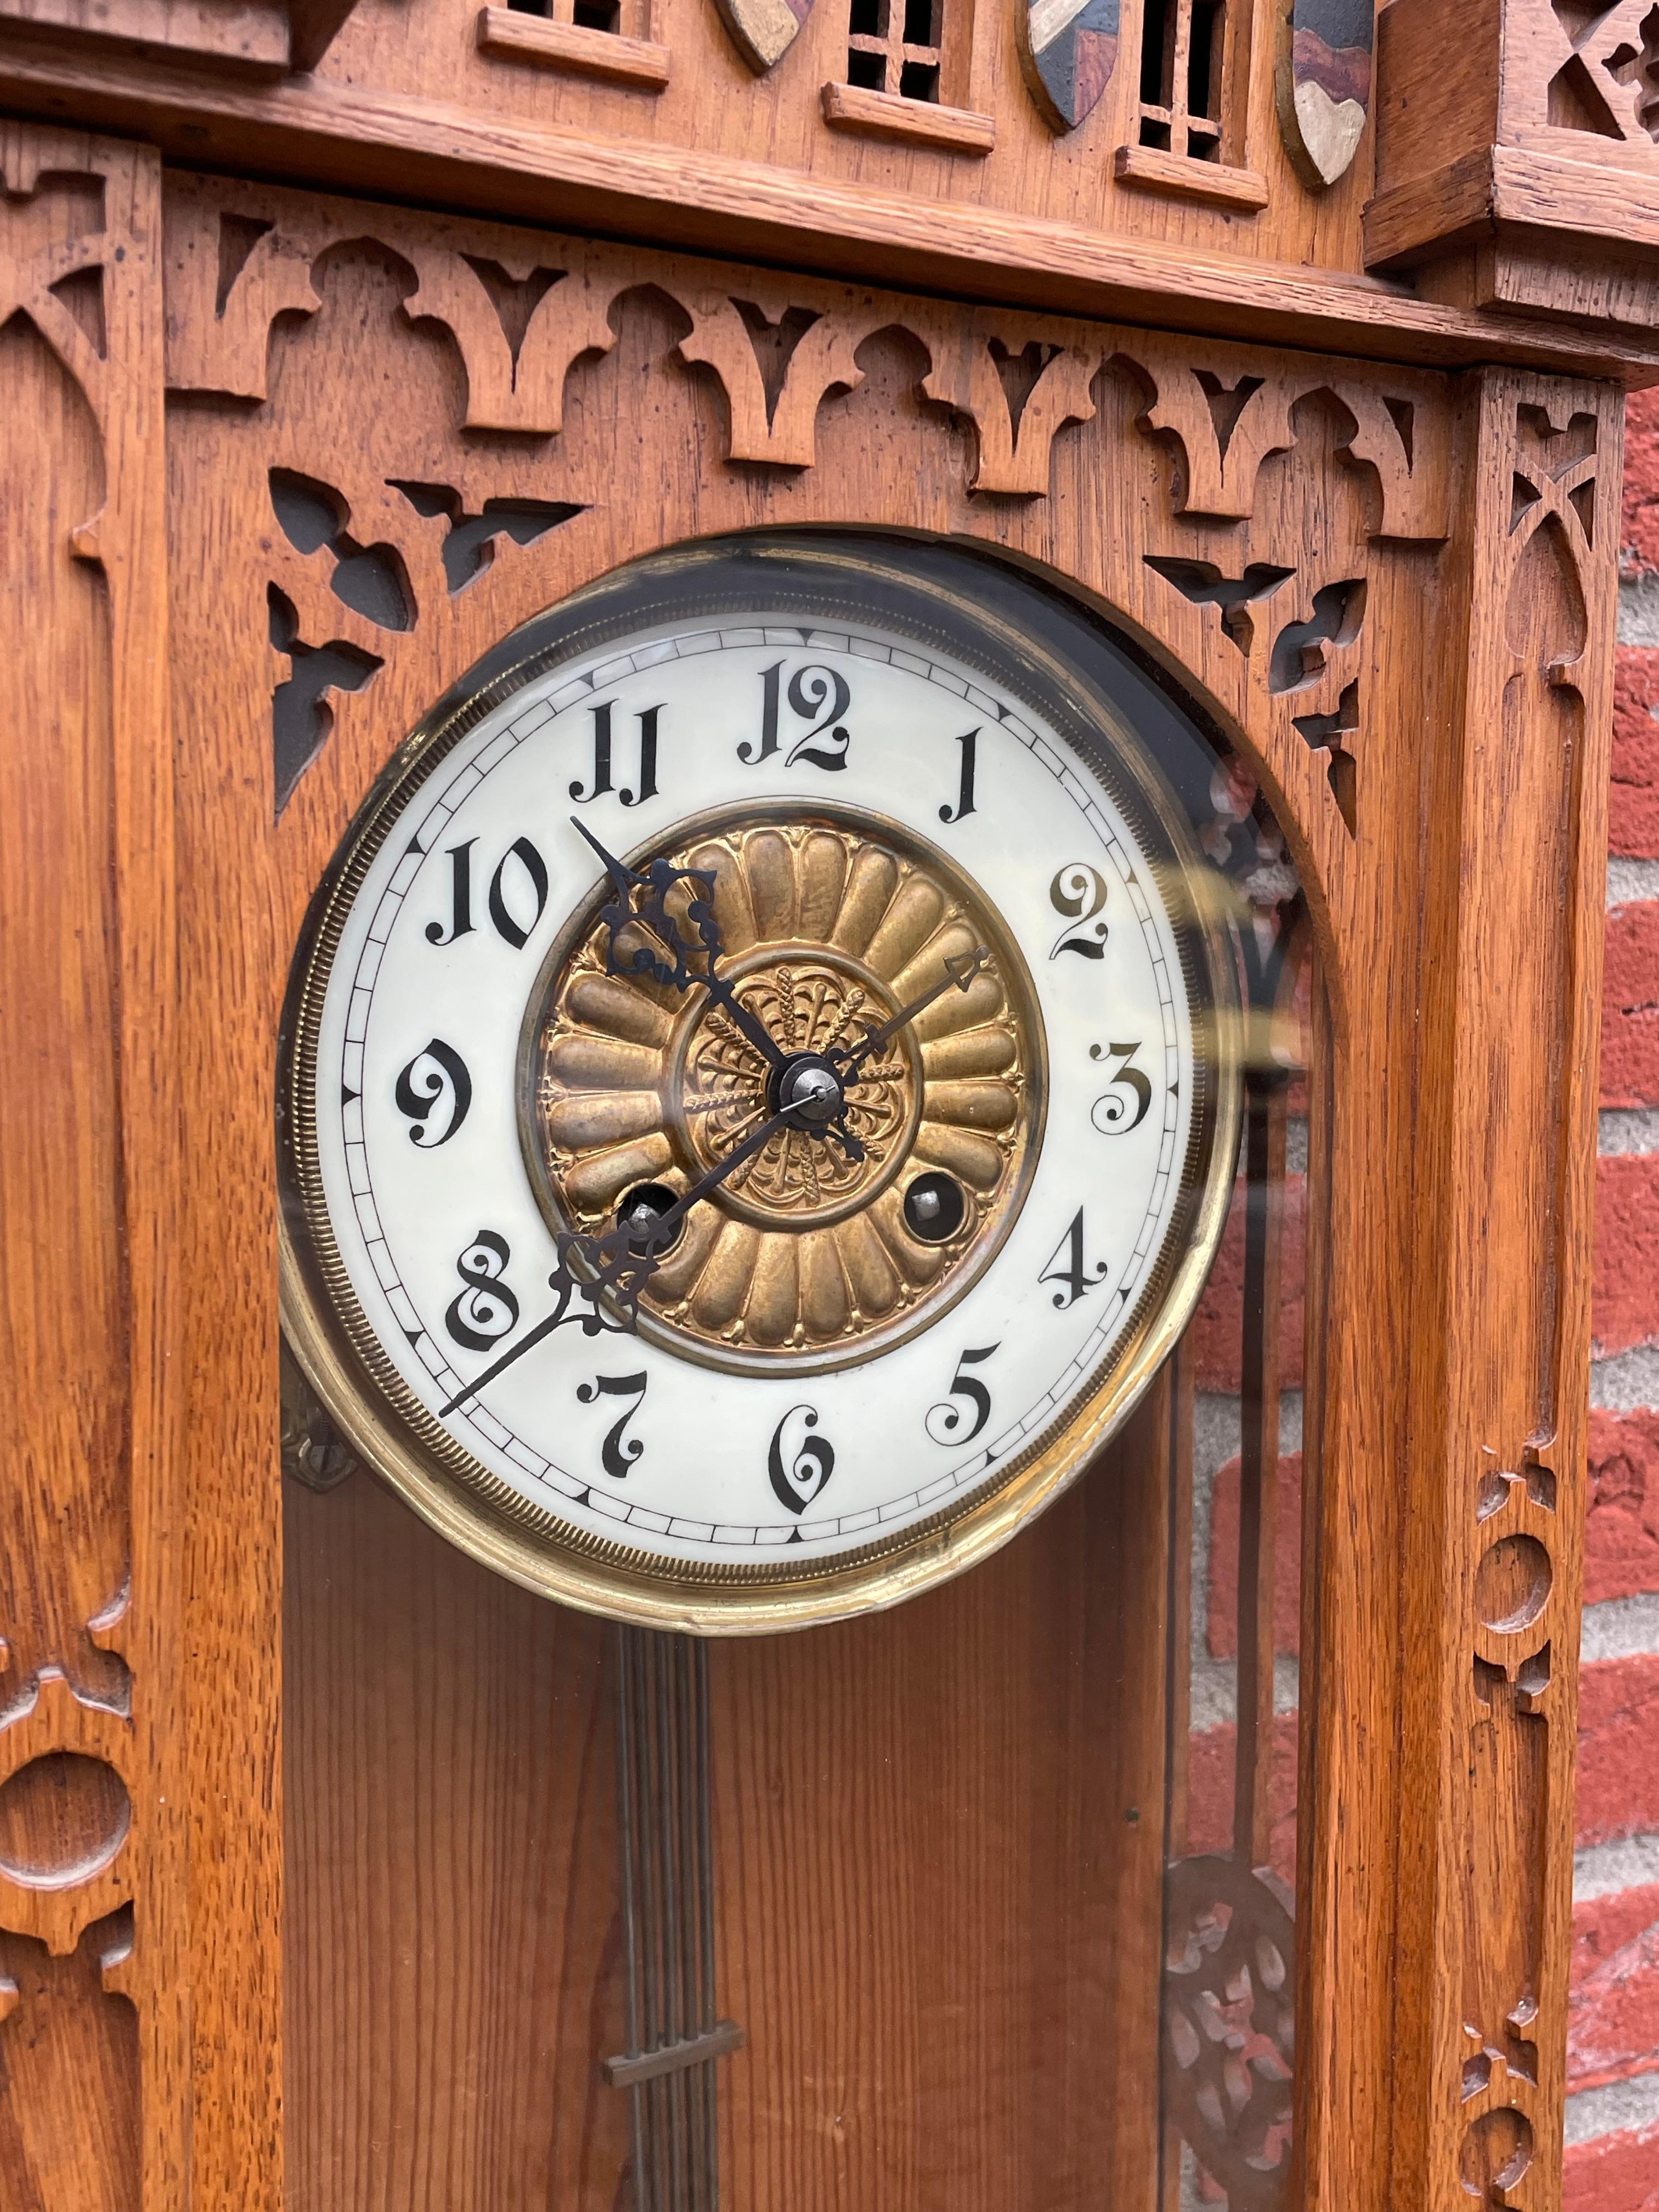 Blackened Rare & Large All Handcrafted Antique Gothic Revival Solid Oak Wall Clock ca 1900